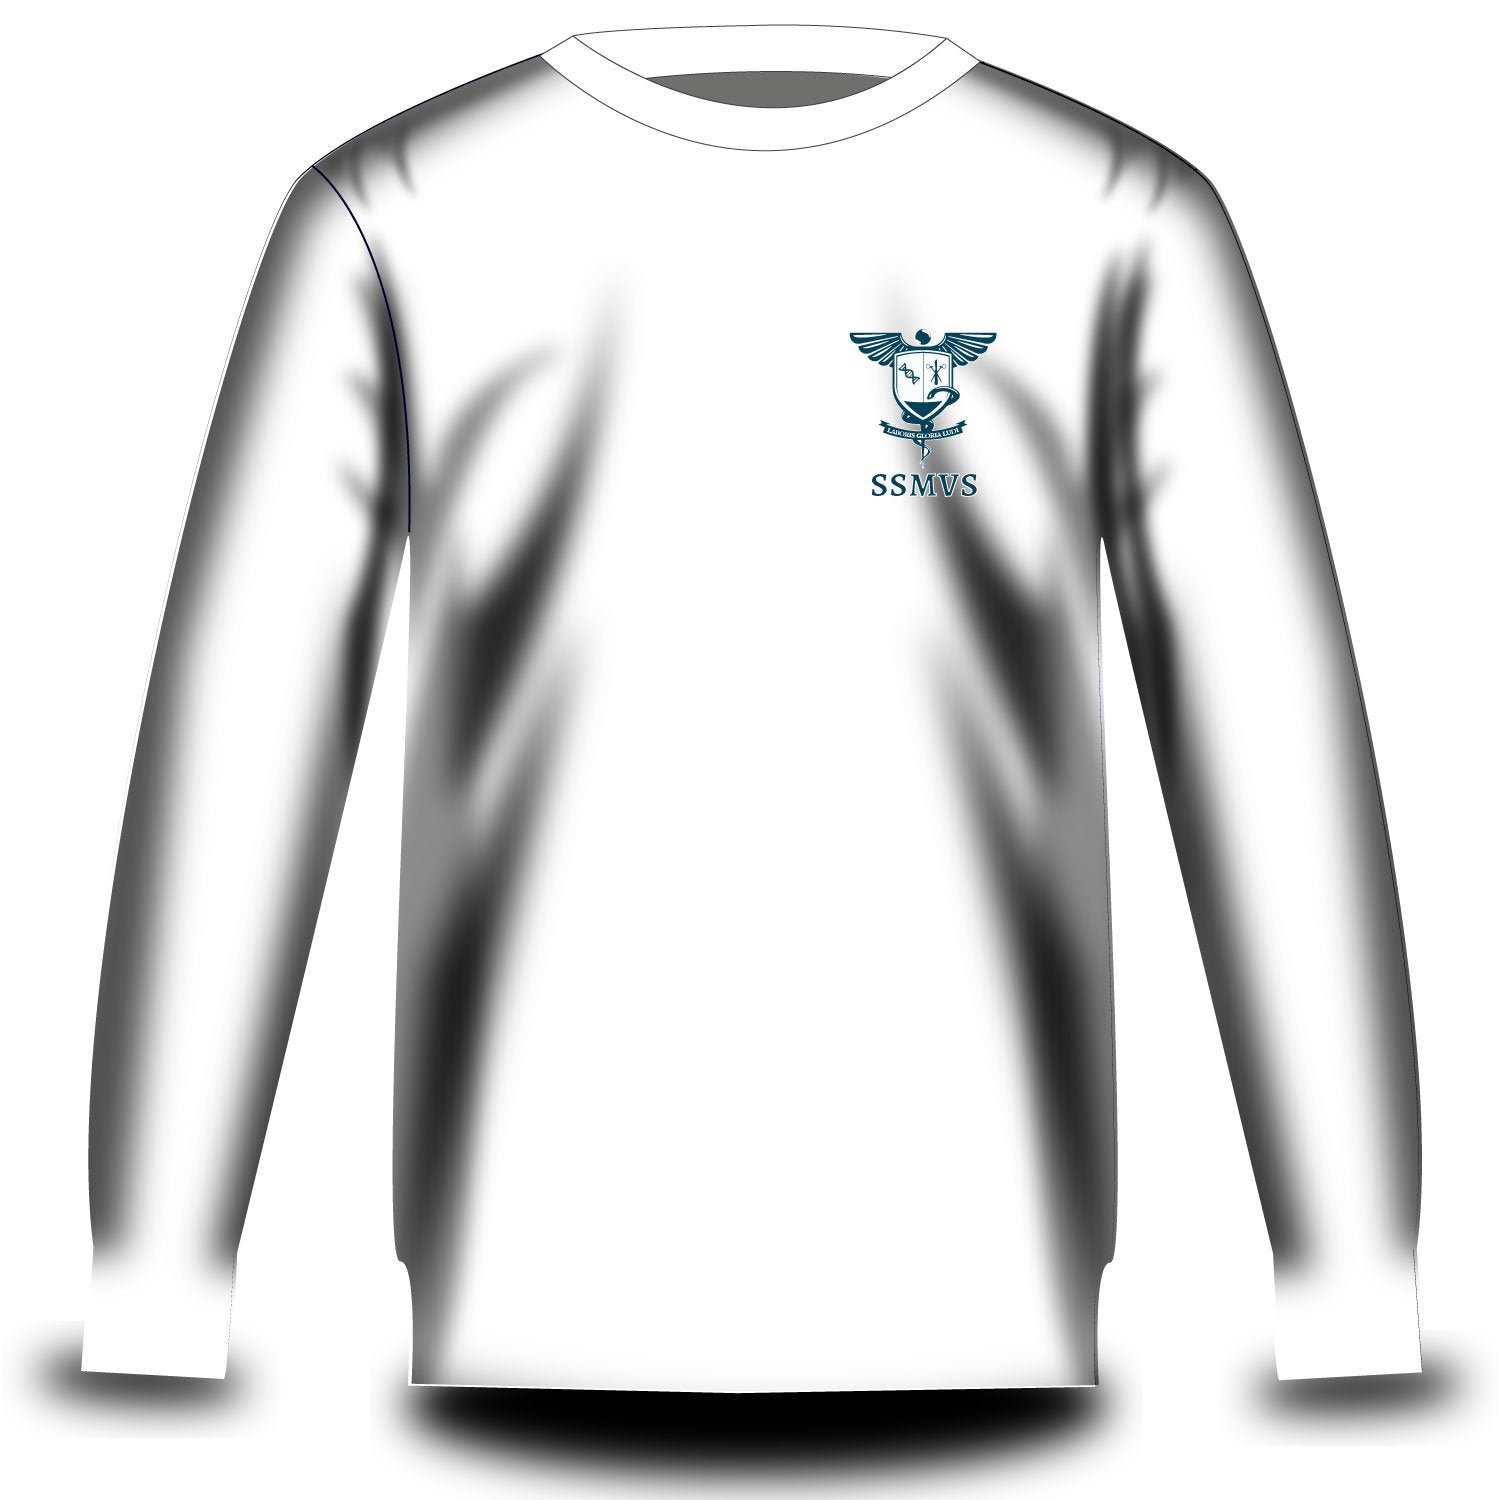 sidney sussex medical and veterinary society sweatshirt white